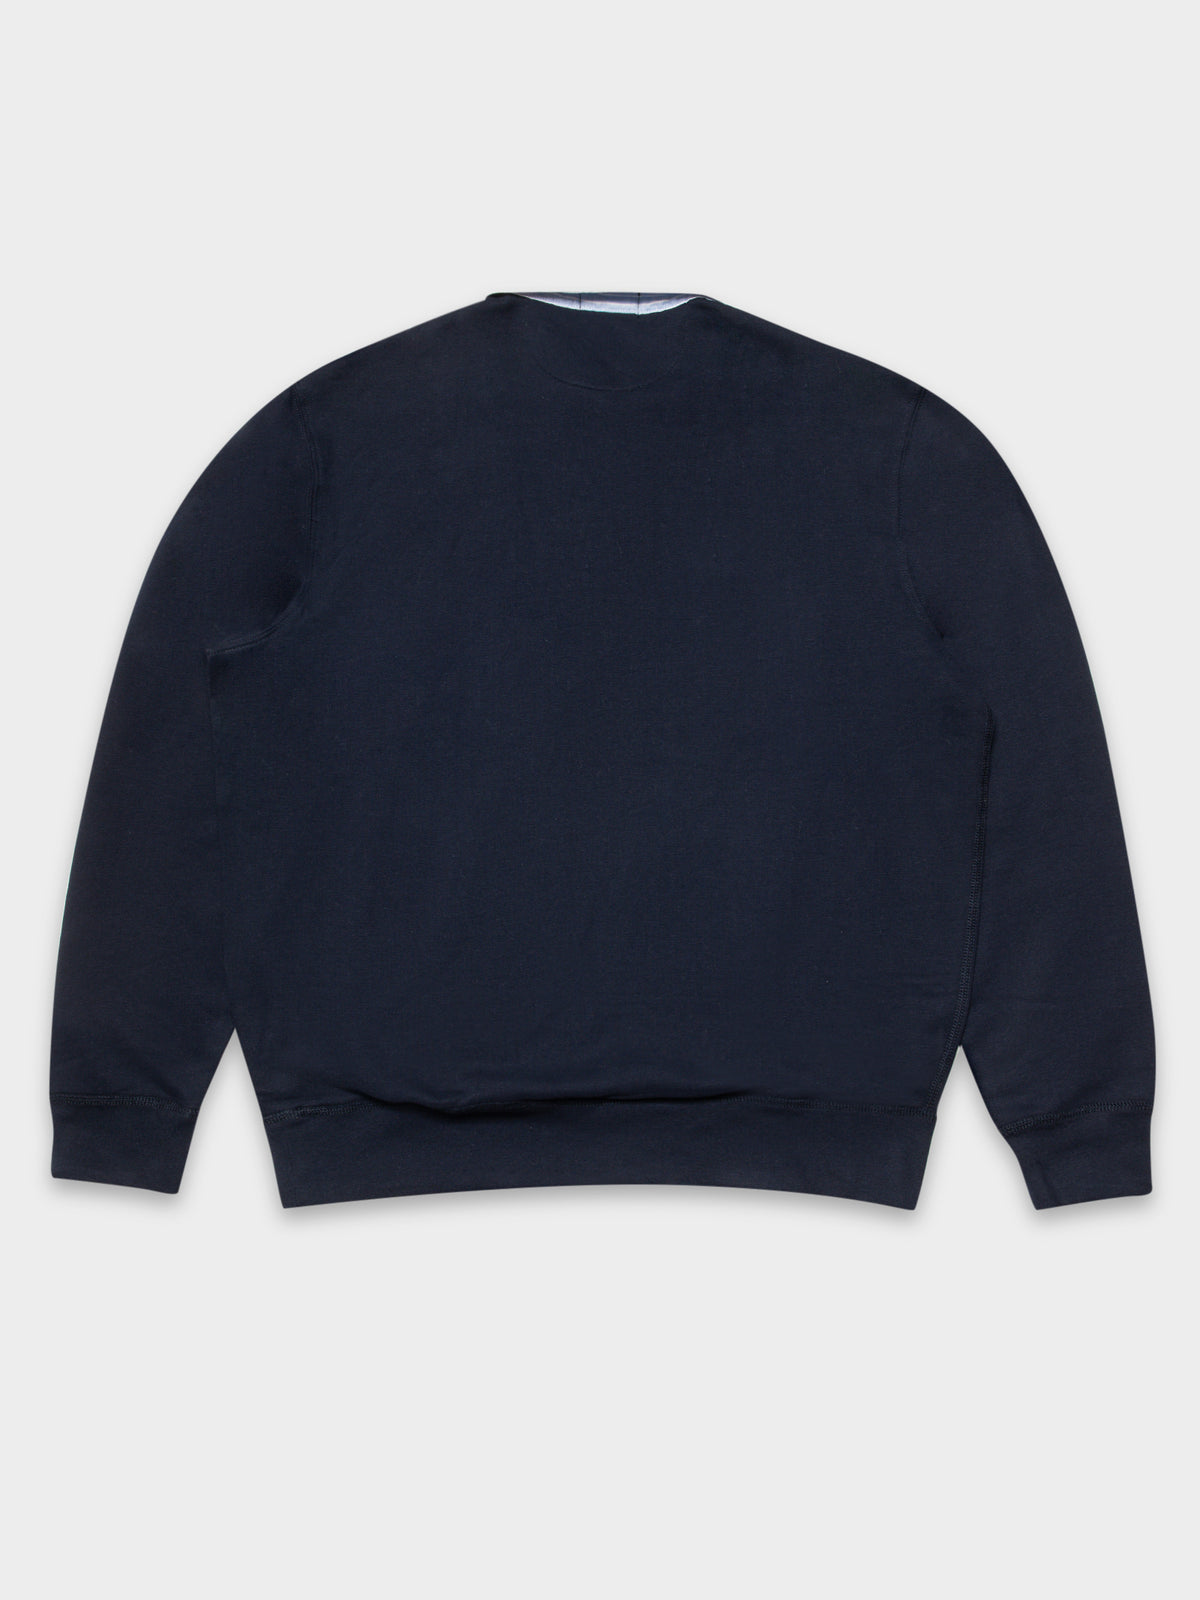 Kanagroo Pocket Jersey Rugby Shirt in Cruise Navy